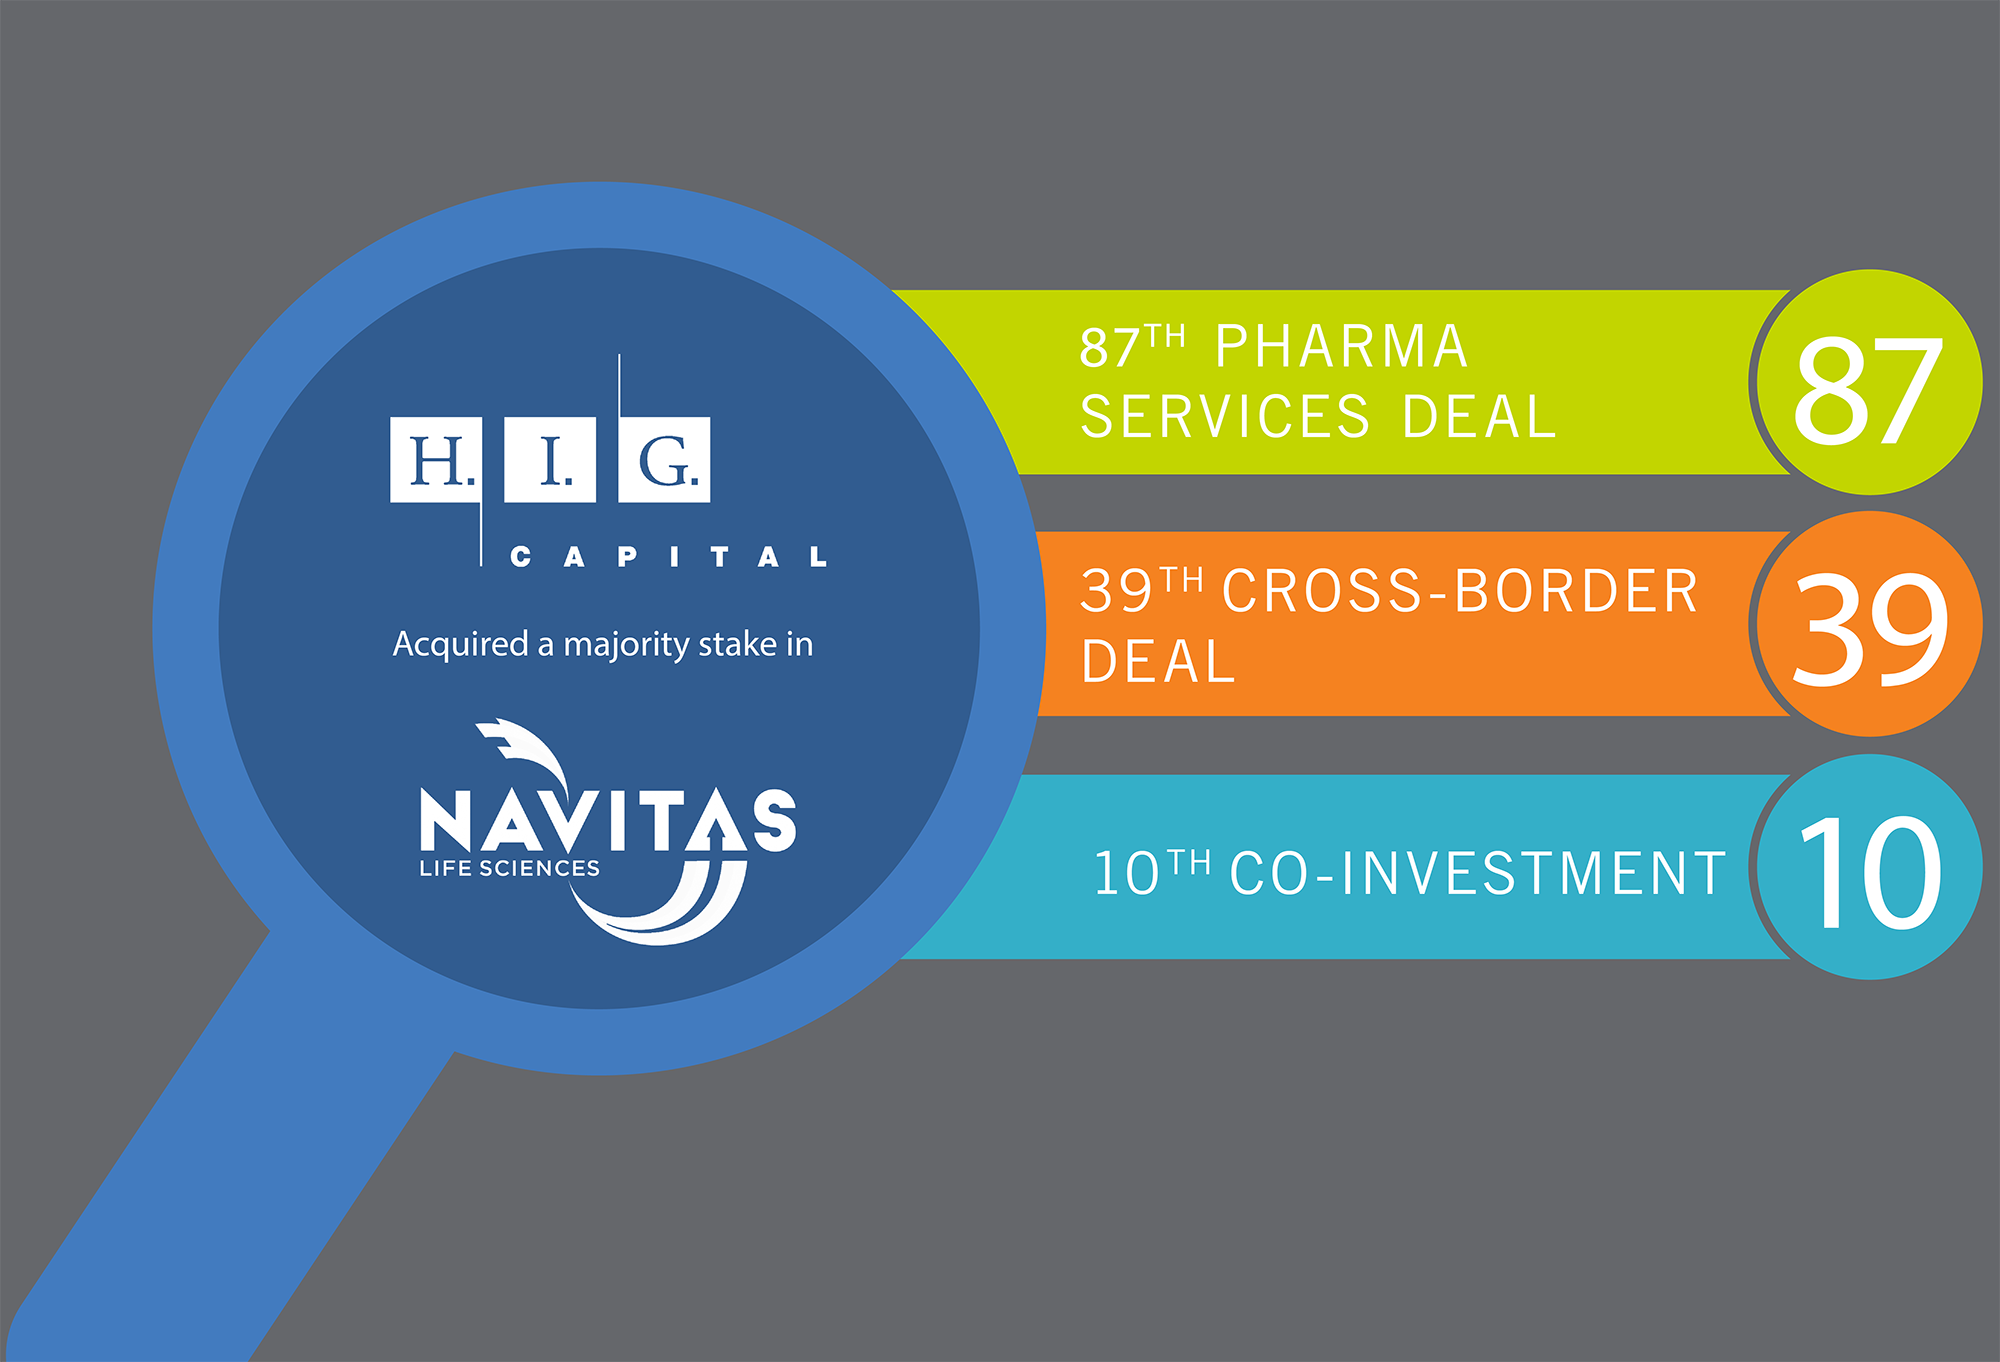 H.I.G. Capital Acquires Majority Stake in Navitas Life Sciences to Accelerate CRO Growth